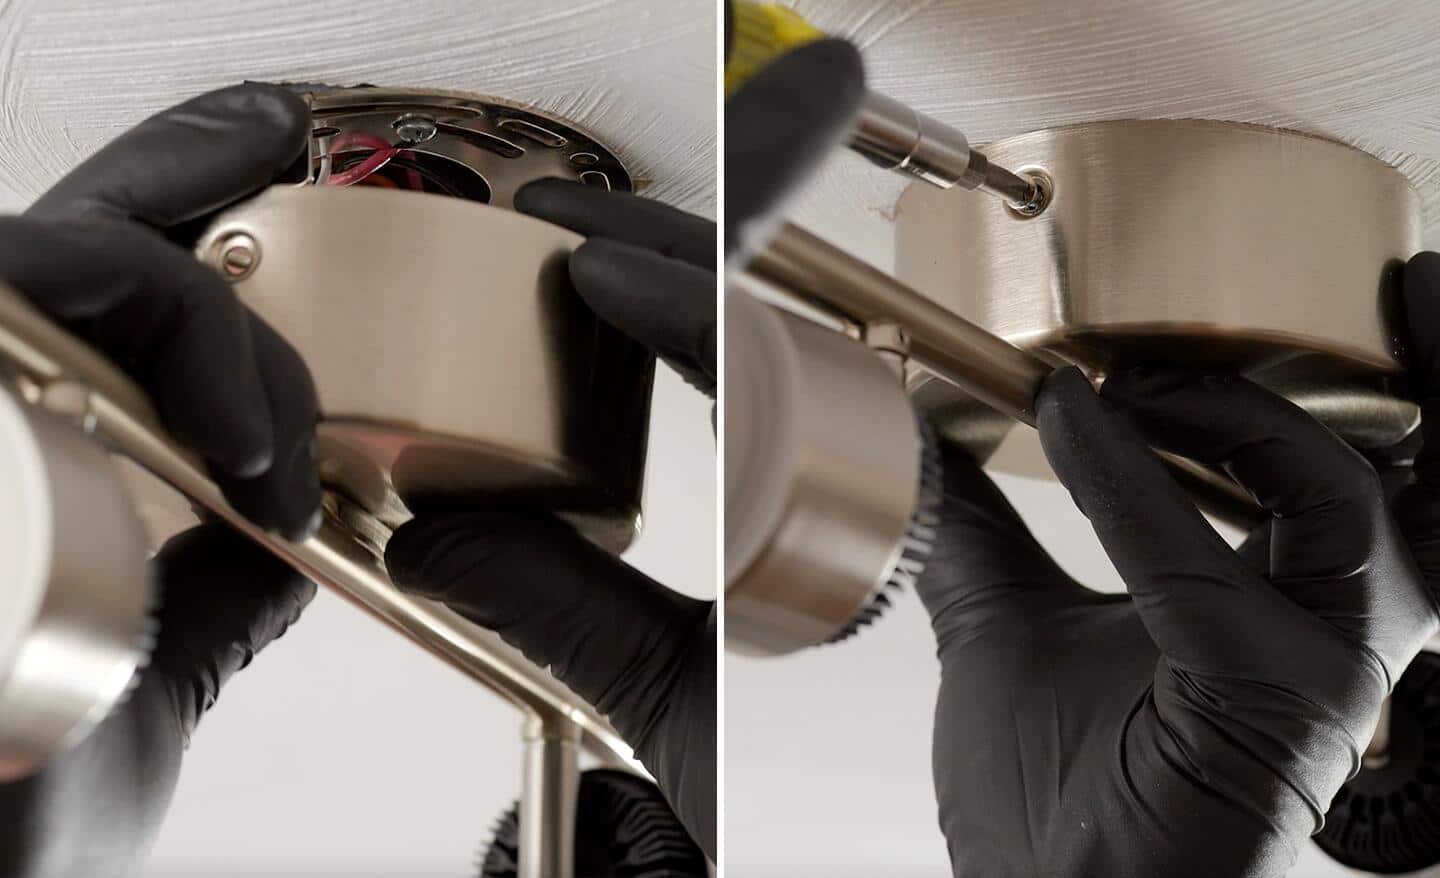 Left image: A person tucks in wires and places a new track lighting fixture onto the mounting plate on the ceiling. Right image: A person uses a screwdriver to secure the track lighting fixture to the tab on the mounting plate.